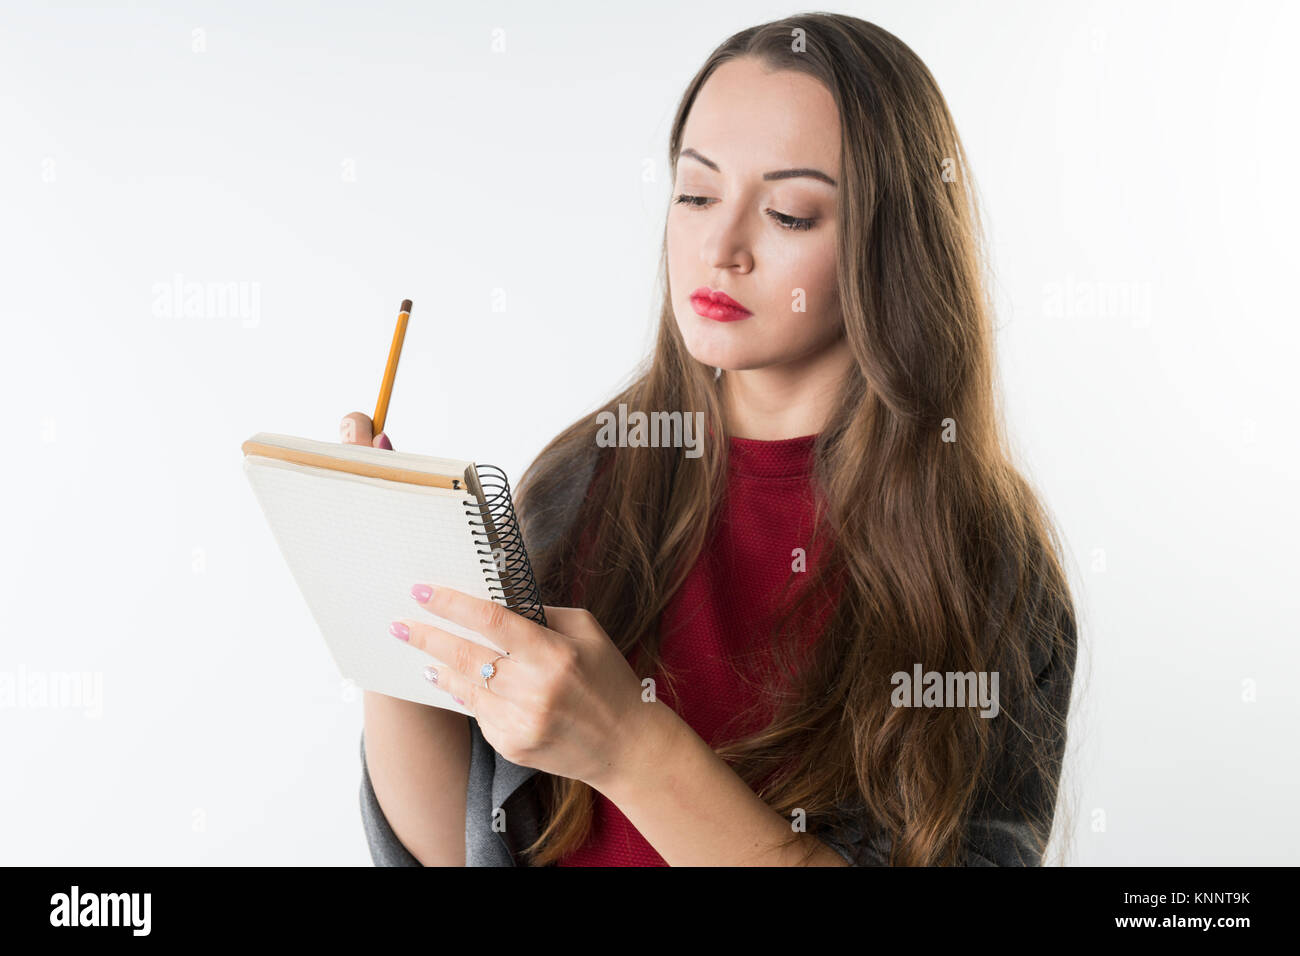 Girl with Sketchbook stock photo. Image of happy, idea - 18502004